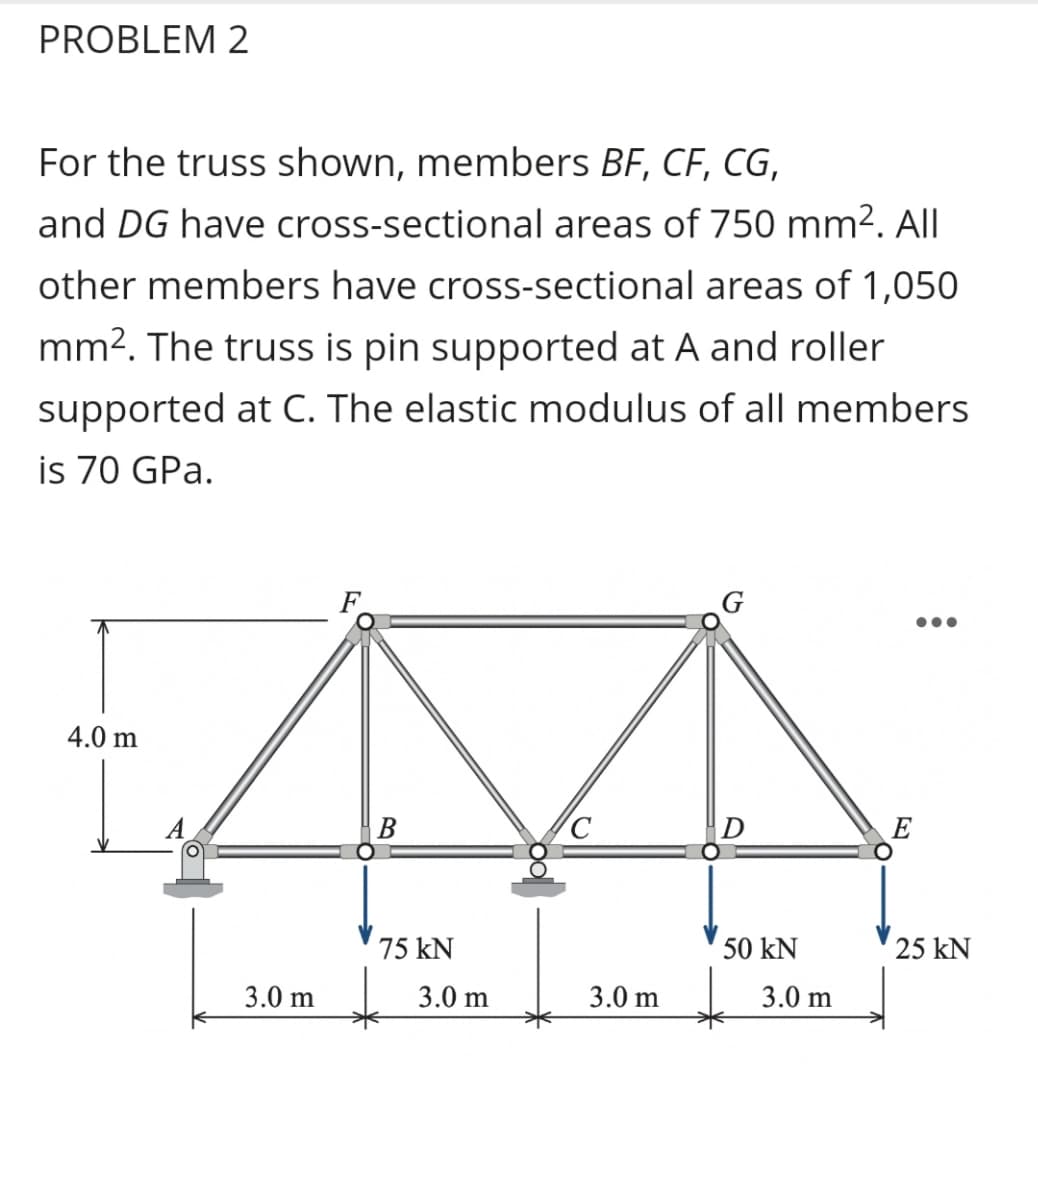 PROBLEM 2
For the truss shown, members BF, CF, CG,
and DG have cross-sectional areas of 750 mm². All
other members have cross-sectional areas of 1,050
mm2. The truss is pin supported at A and roller
supported at C. The elastic modulus of all members
is 70 GPa.
4.0 m
B
E
75 kN
50 kN
25 kN
3.0 m
3.0 m
3.0 m
3.0 m
